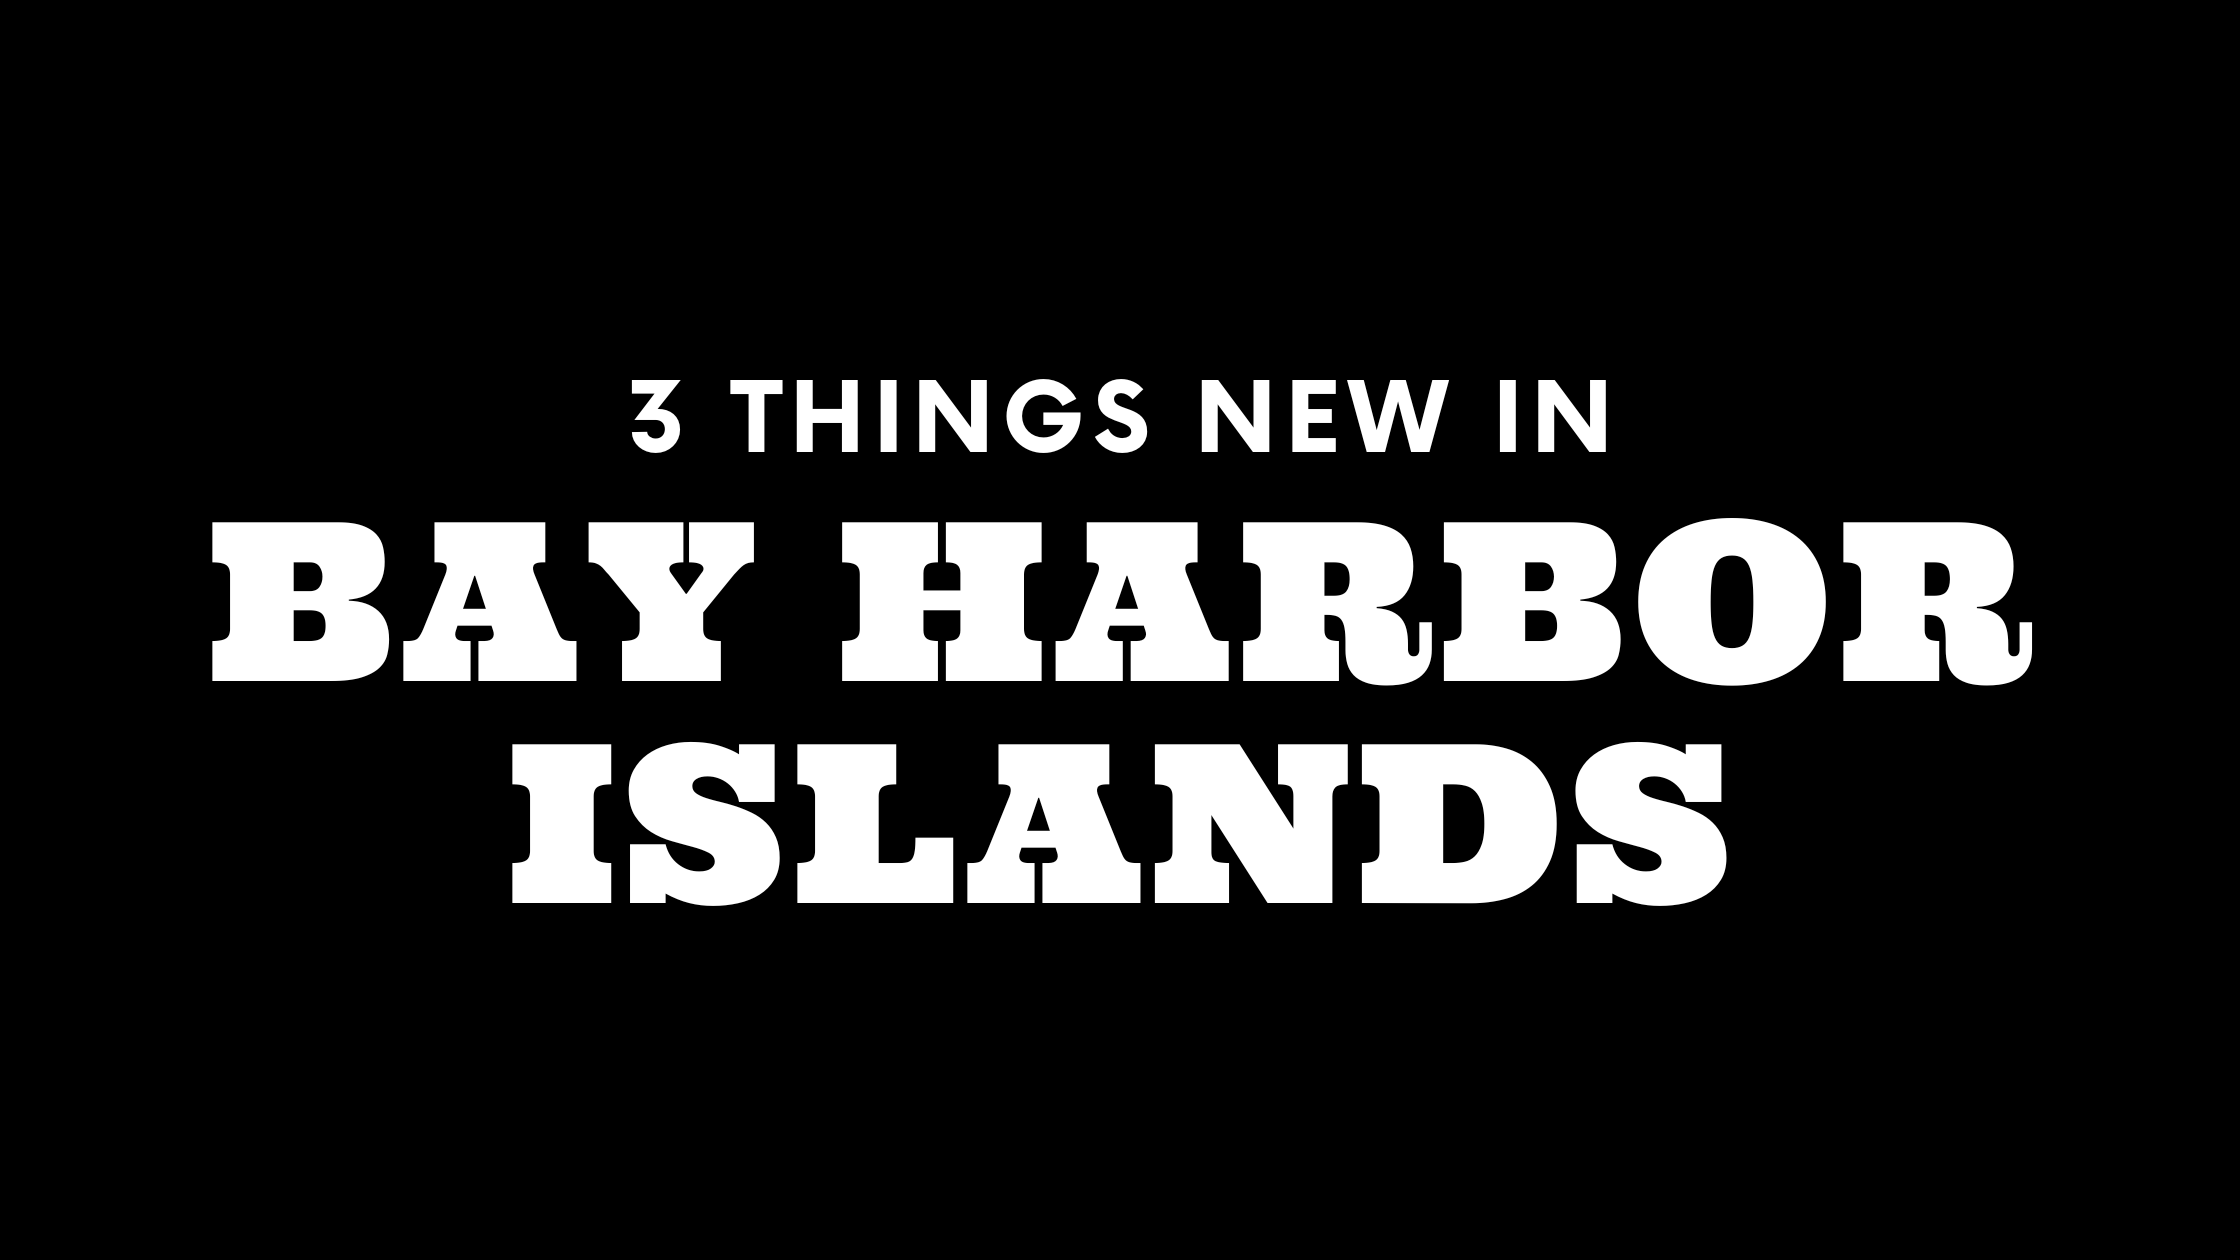 3 Things New in Bay Harbor Islands!